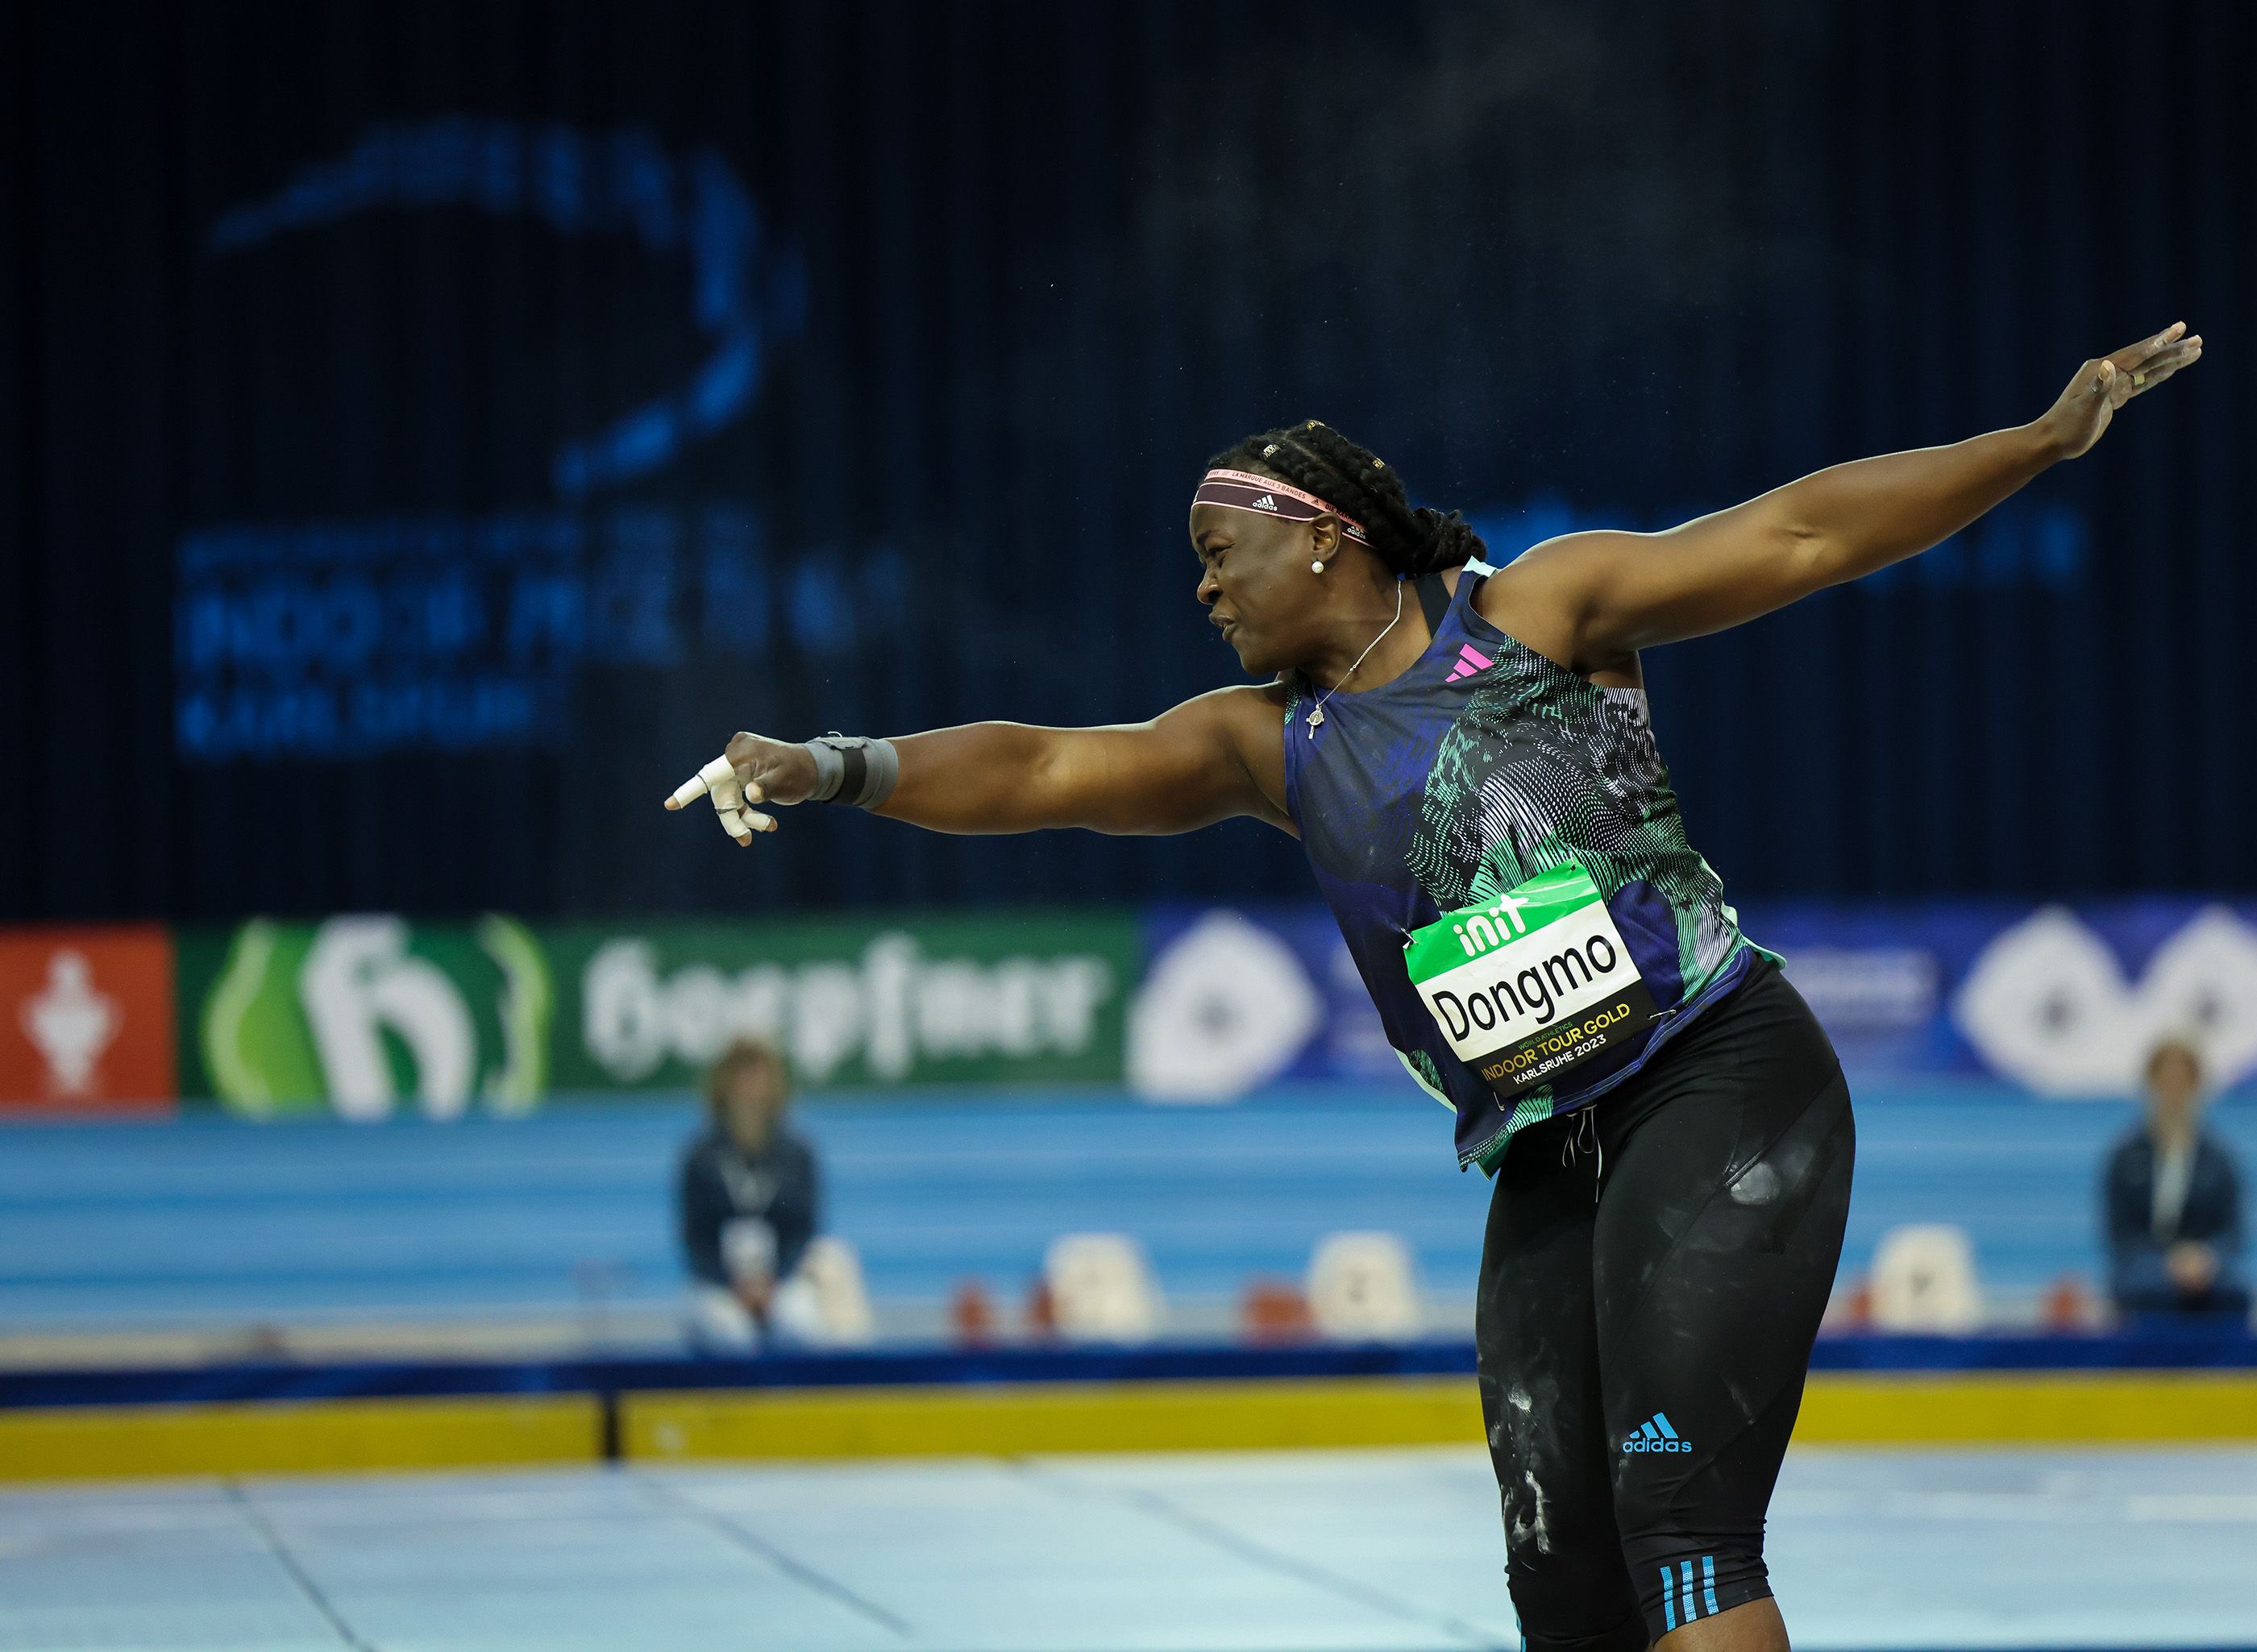 Shot put winner Auriol Dongmo in action at the World Indoor Tour Gold meeting in Karlsruhe